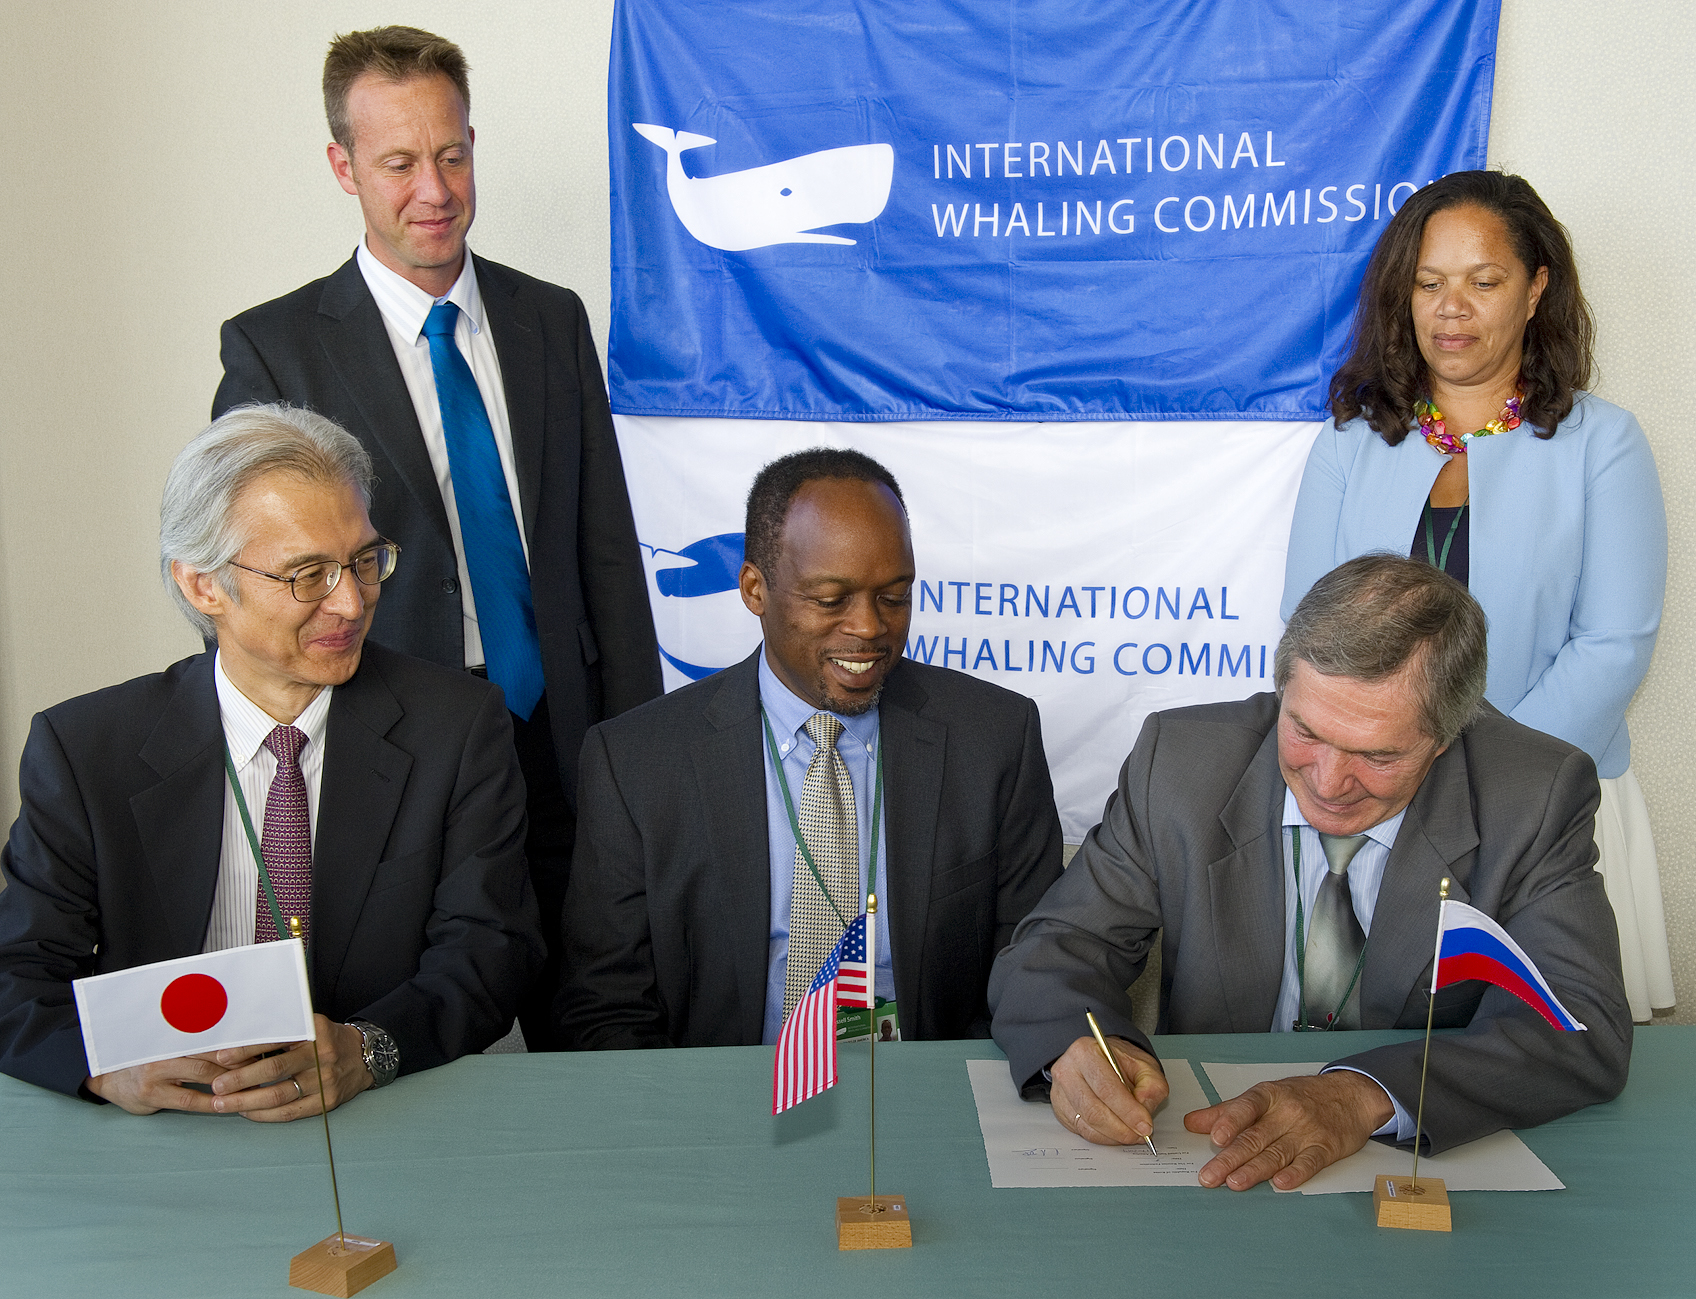 Representatives of the Russian Federation, USA and Japan signing the MoU to implement the Western Gray Whale Conservation Plan